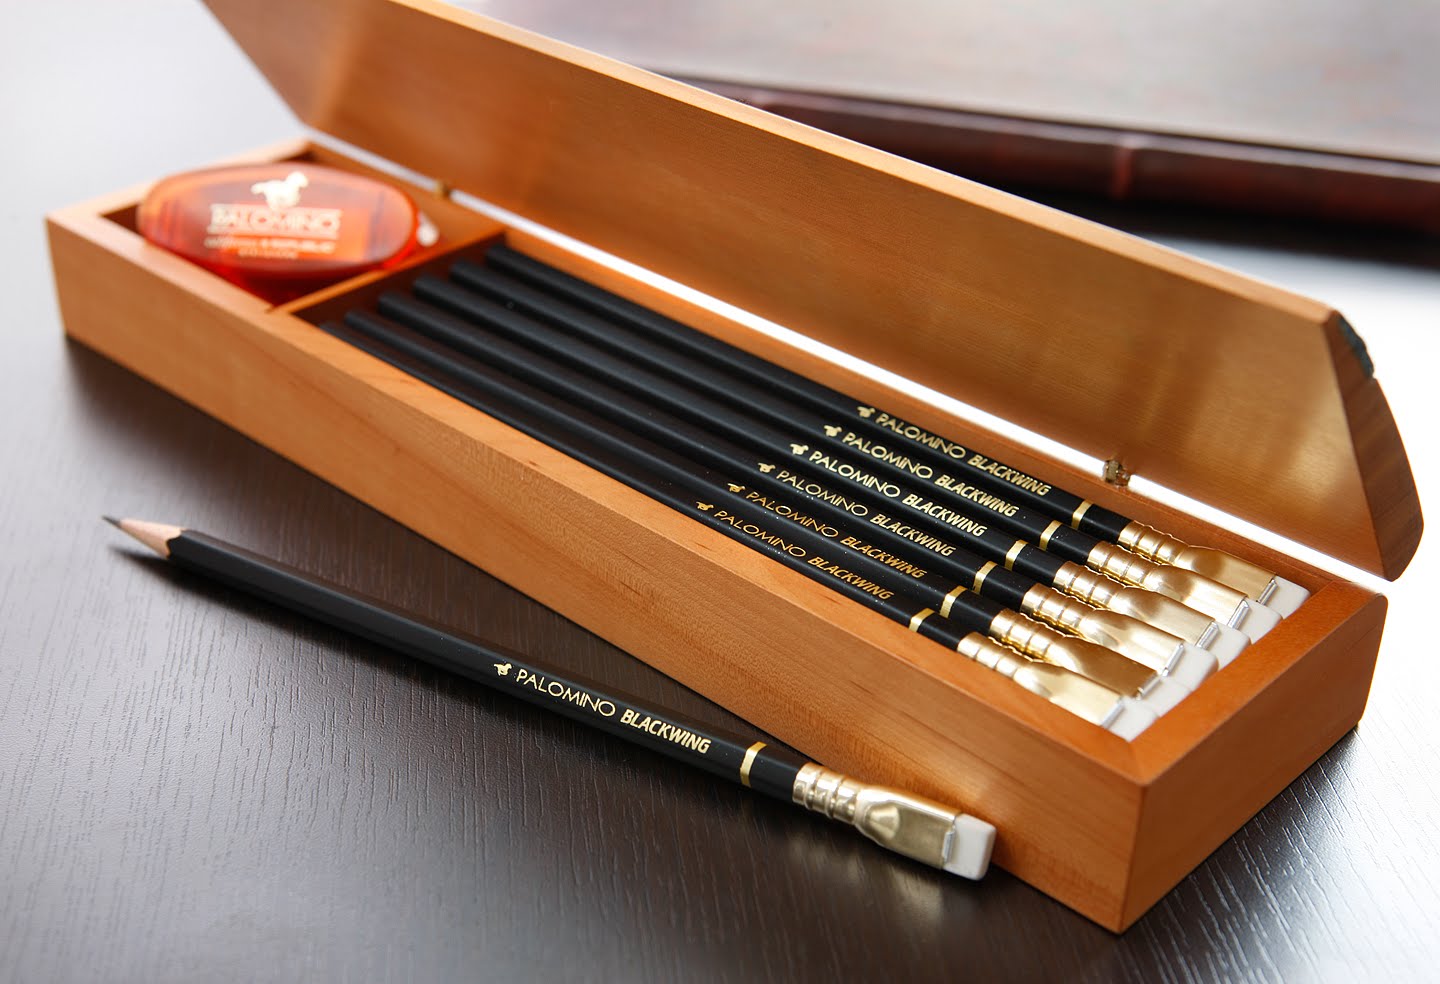 PALOMINO BLACKWING 602 PENCIL REVIEW, The Pencilcase Blog